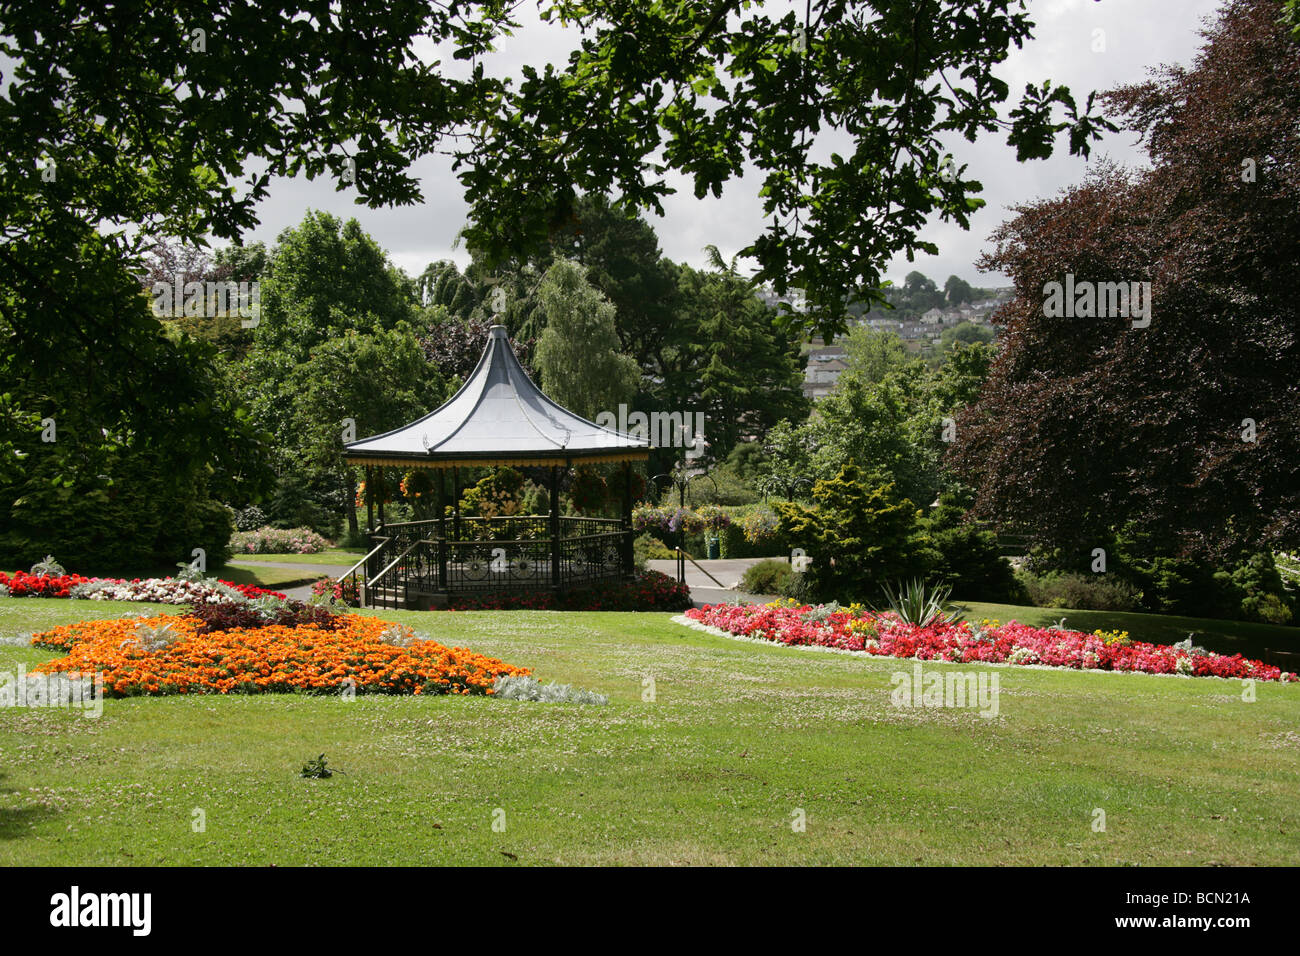 City of Truro, England. Flower beds in full bloom in Truro’s Victoria Gardens, with the Victorian bandstand in the background. Stock Photo